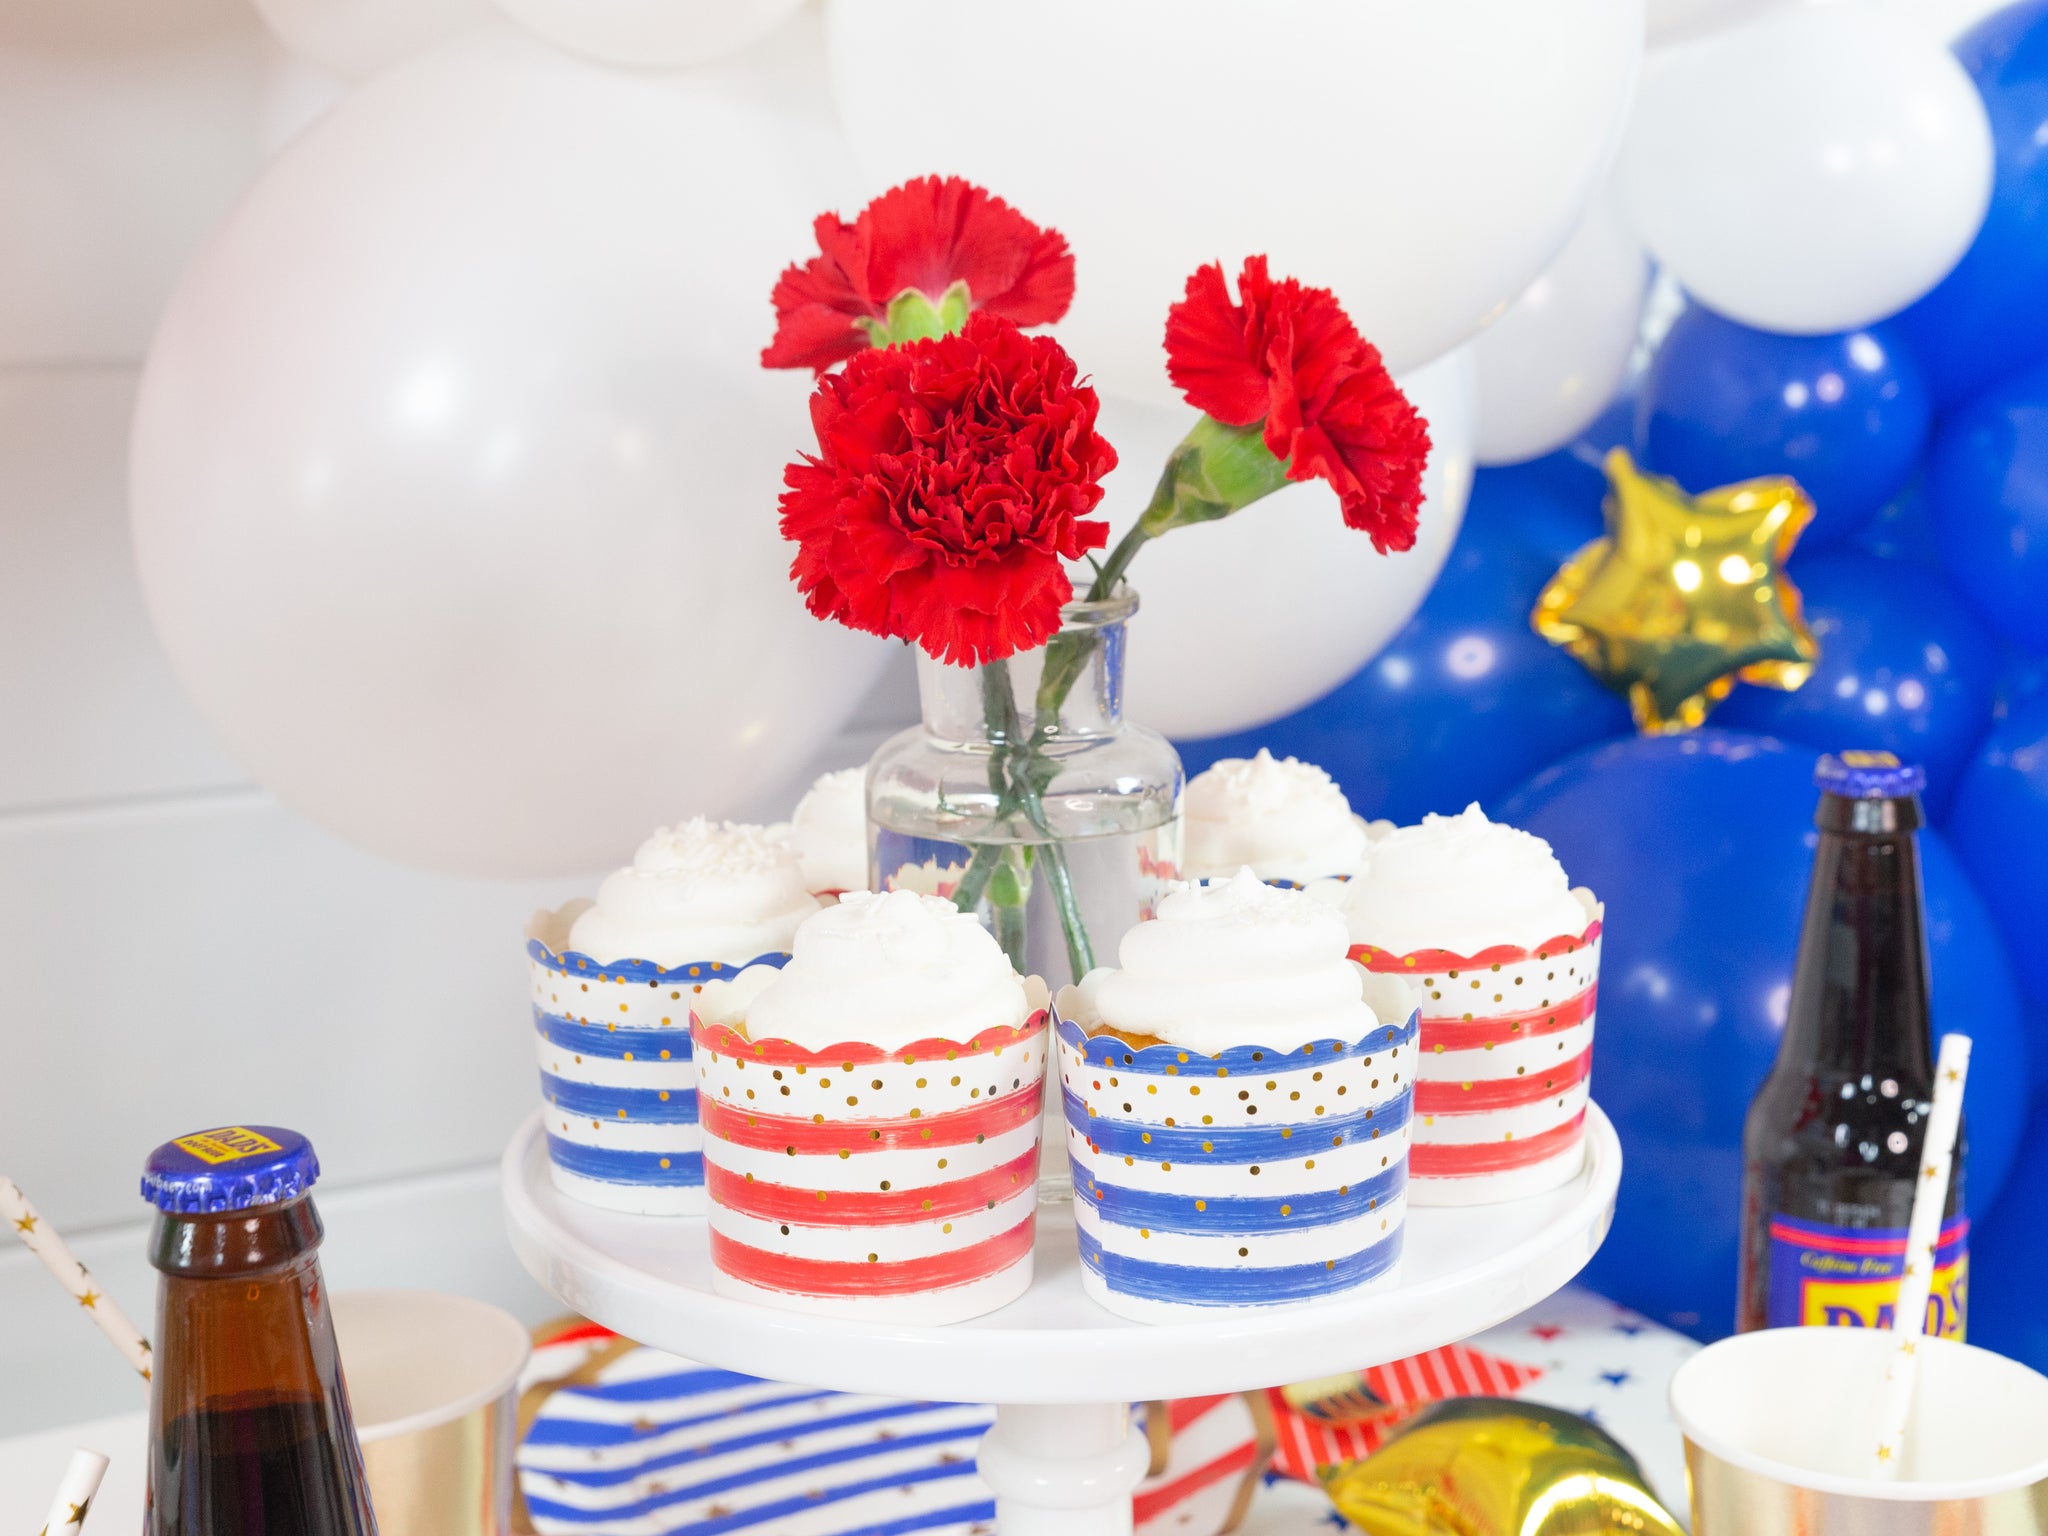 Blue and Red Baking Cups with Cupcakes